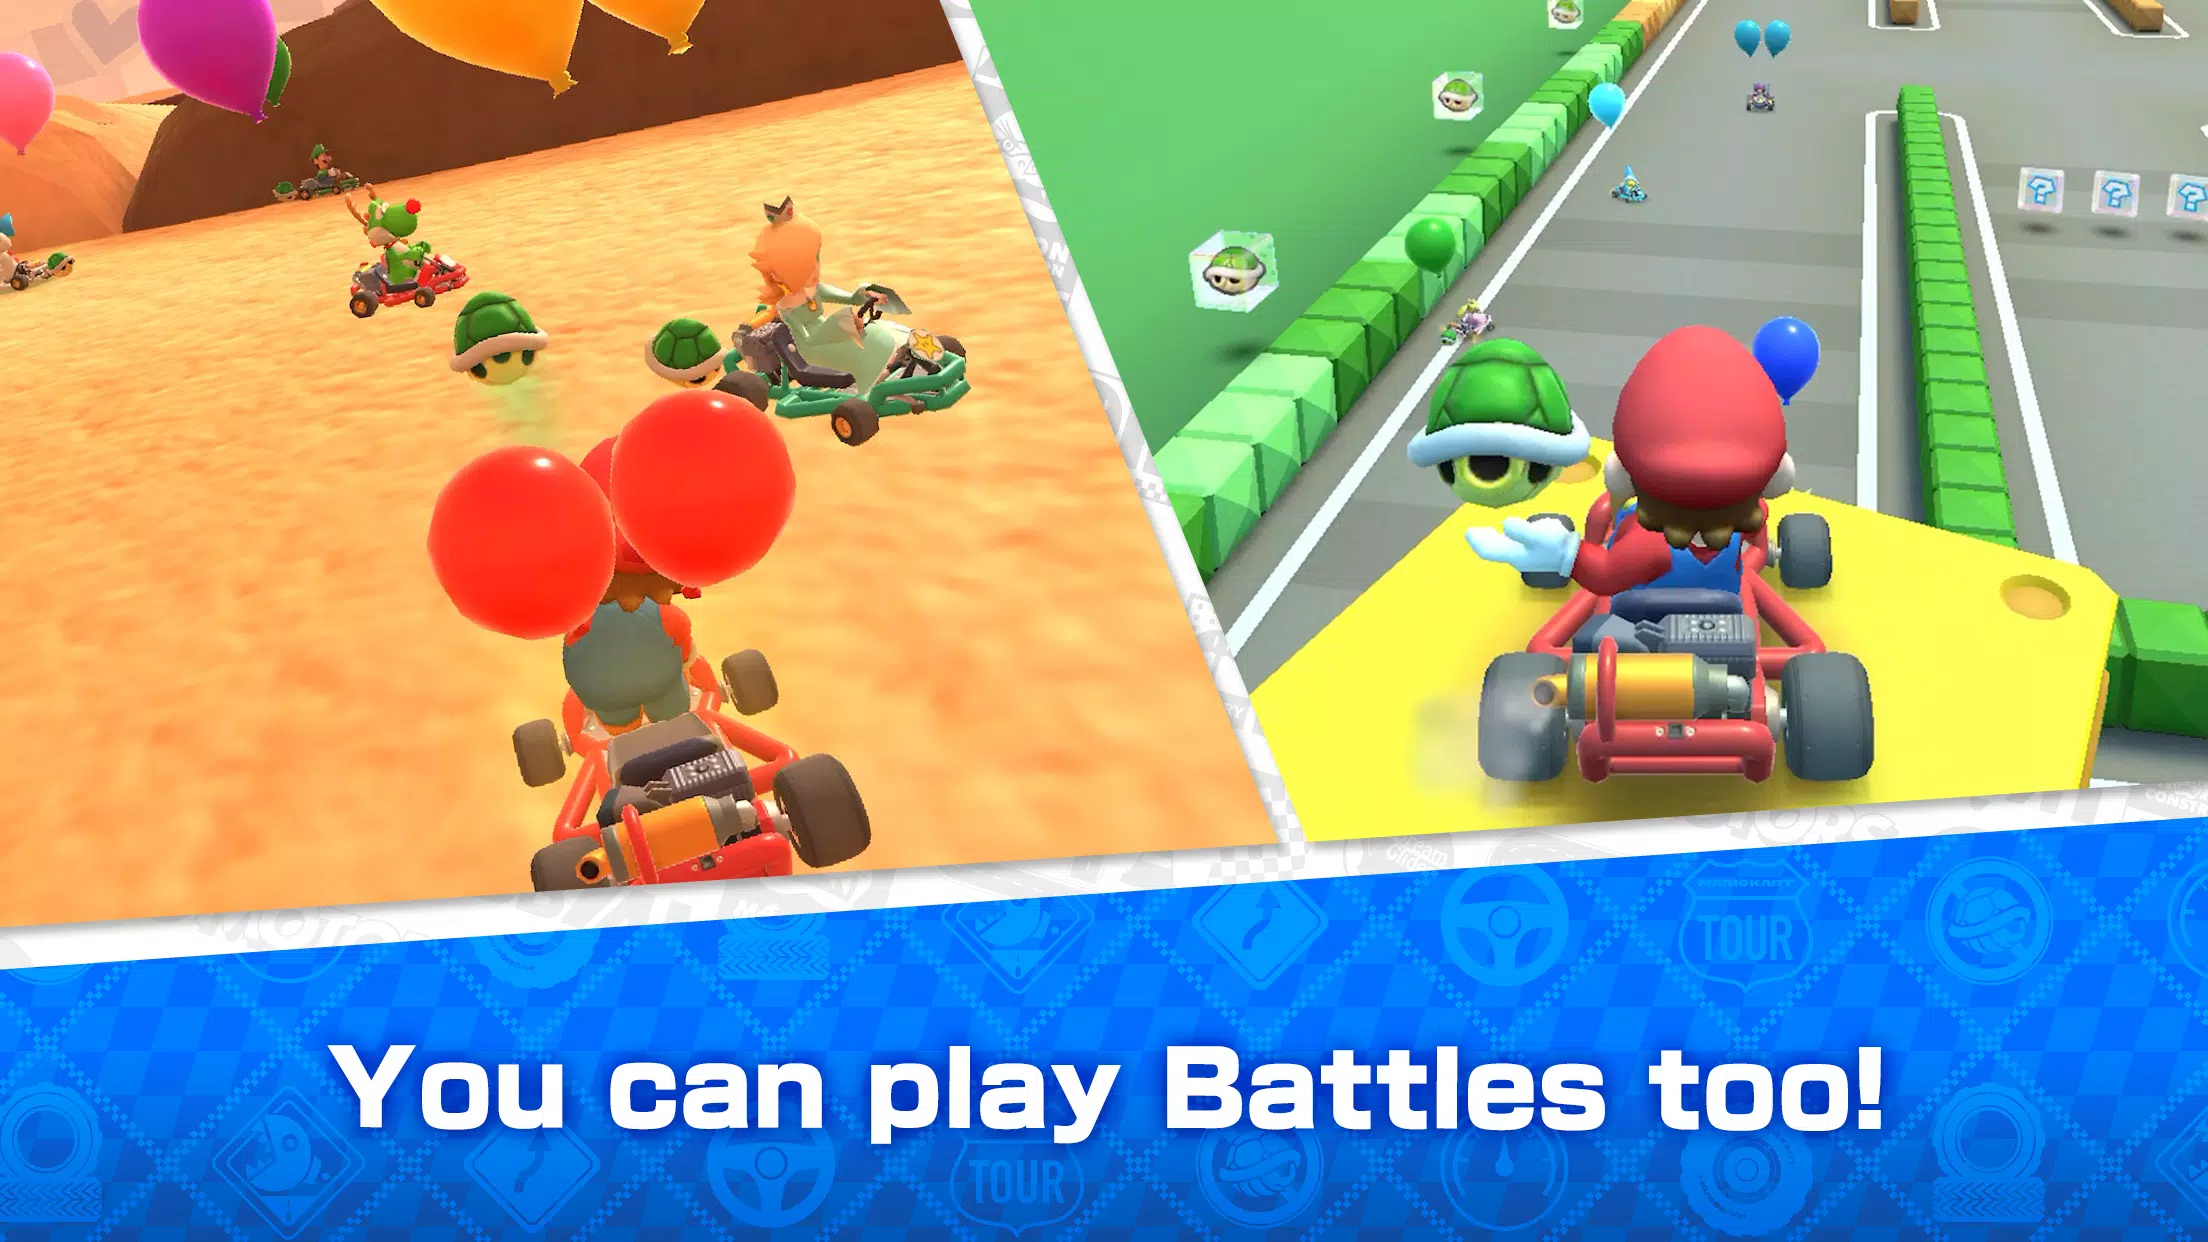 Download Mario Kart Tour free for Android APK - CCM